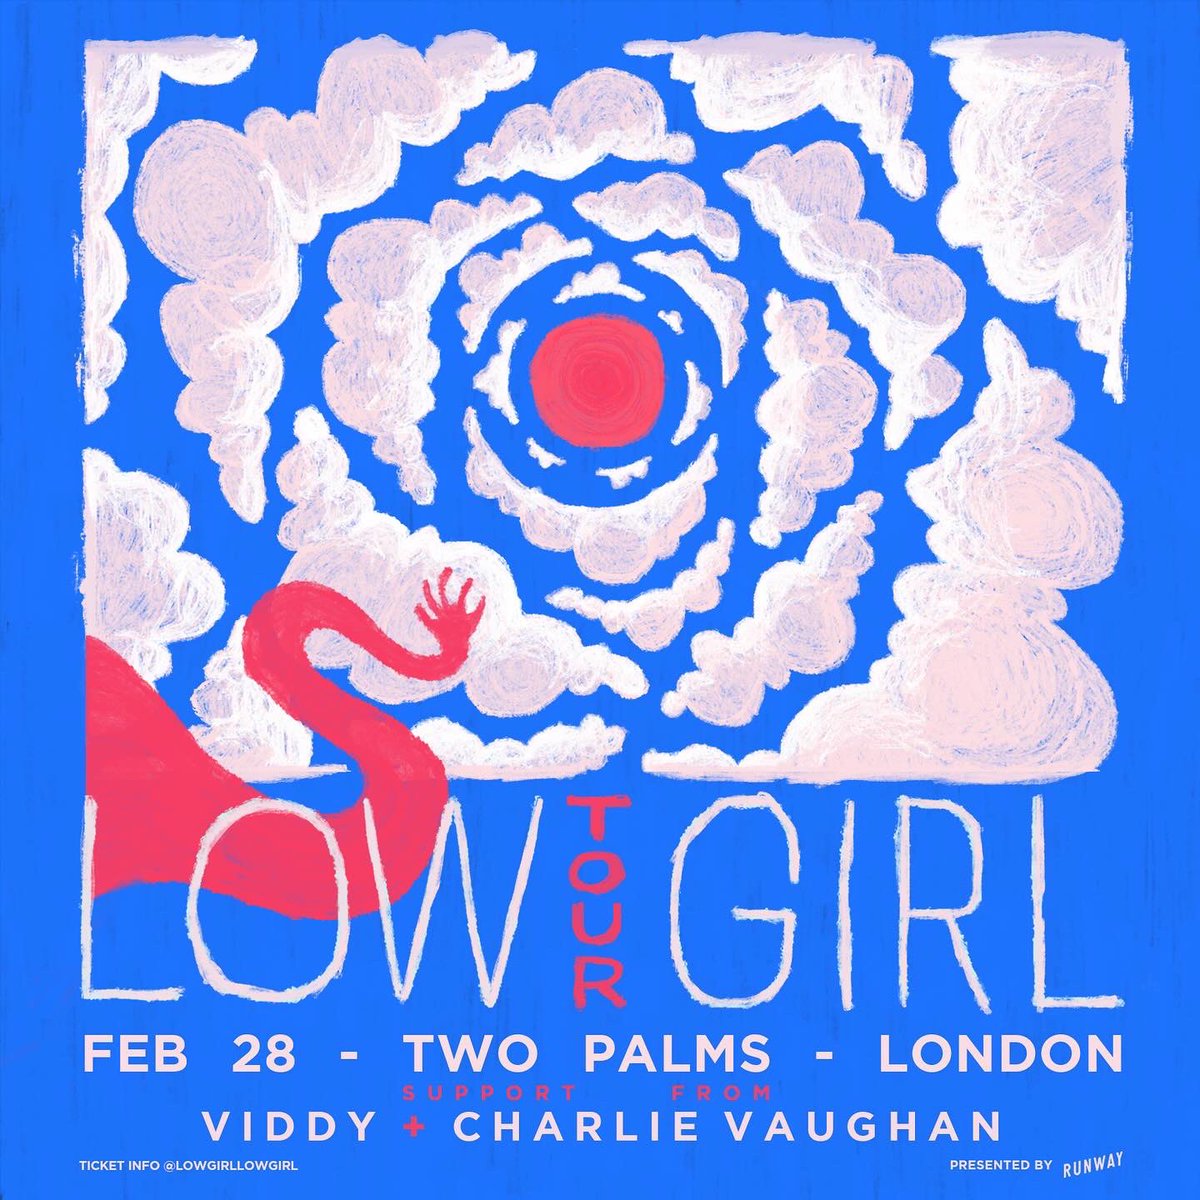 Got a tasty show coming up with @viddyband and Charlie Vaughn 😎 might even make cookies for everyone idk lnk.to/LowGirl_Icarus << tickets in here